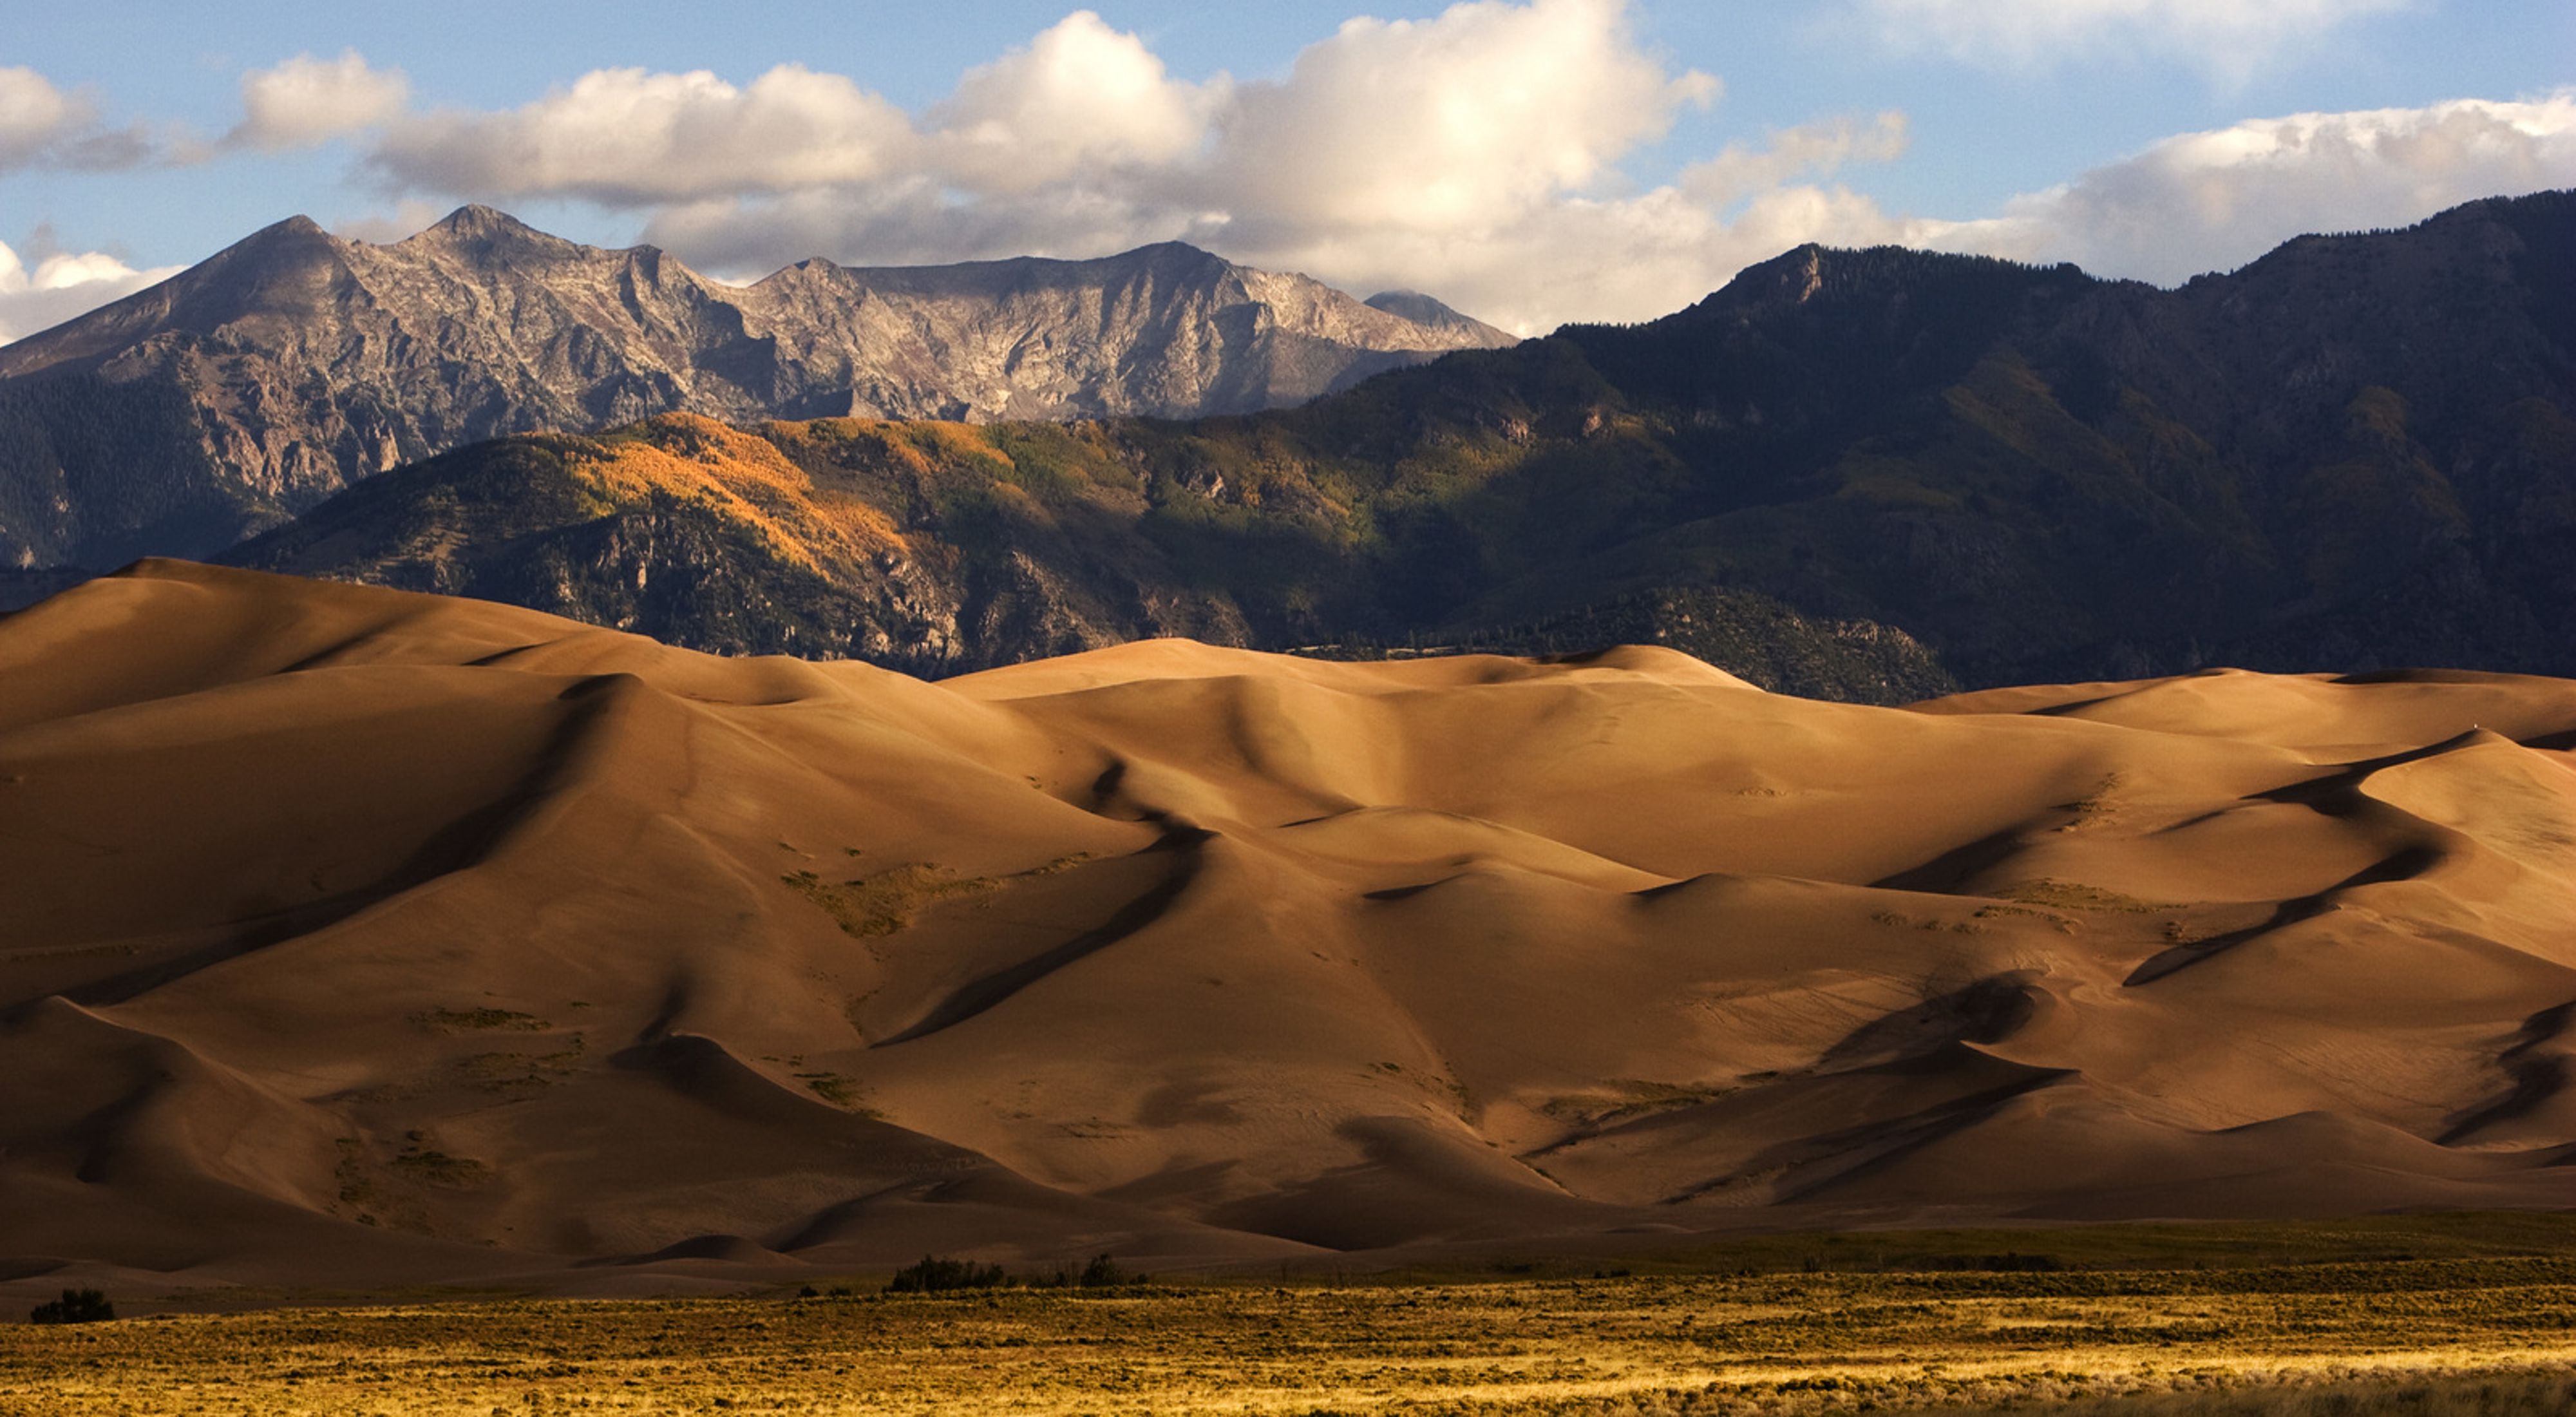 Golden sand dunes with mountains in the background.